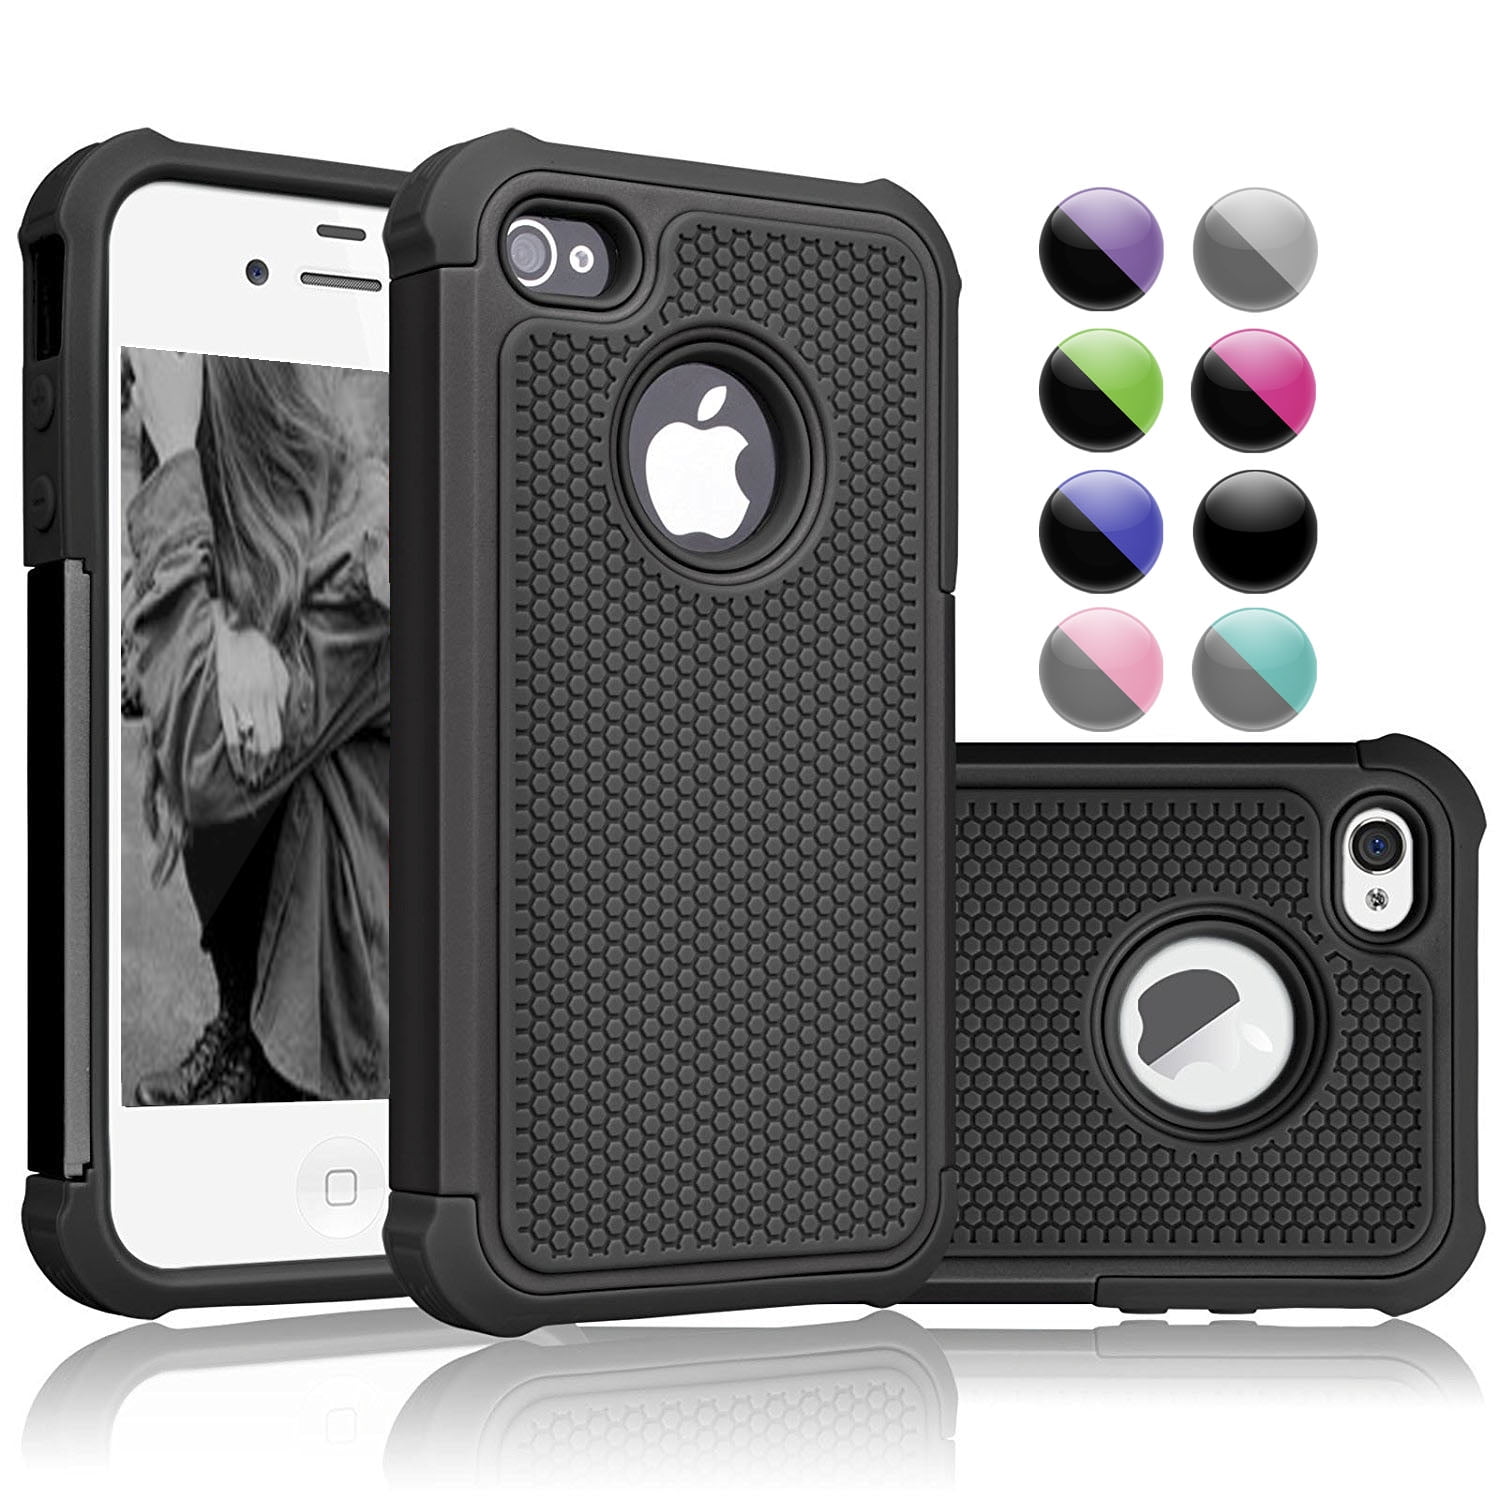 Puur Frustrerend Dierbare iPhone SE Case, iPhone 5S Case Cover, Njjex iPhone 5 5S SE 5SE Case Shock  Absorbing Hybrid Defender Rugged Cover Skin Shell Hard Plastic Outer &  Rubber Silicone Inner - Walmart.com